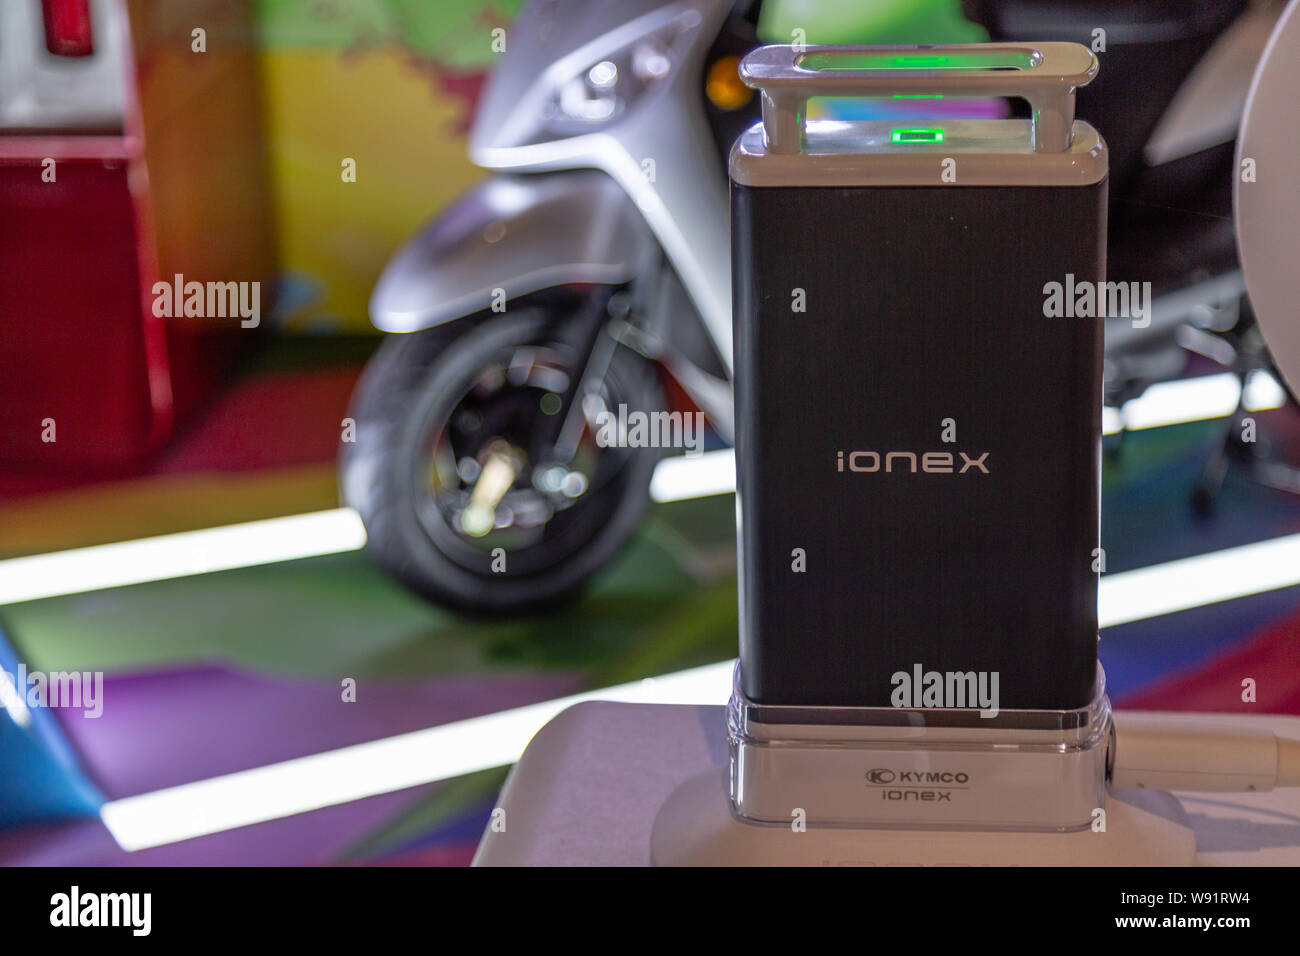 Taichung, Taiwan - August 4, 2019: Kymco IoneX battery-powered electric scooter display with batteries and charging stations. Alternative energy conce Stock Photo